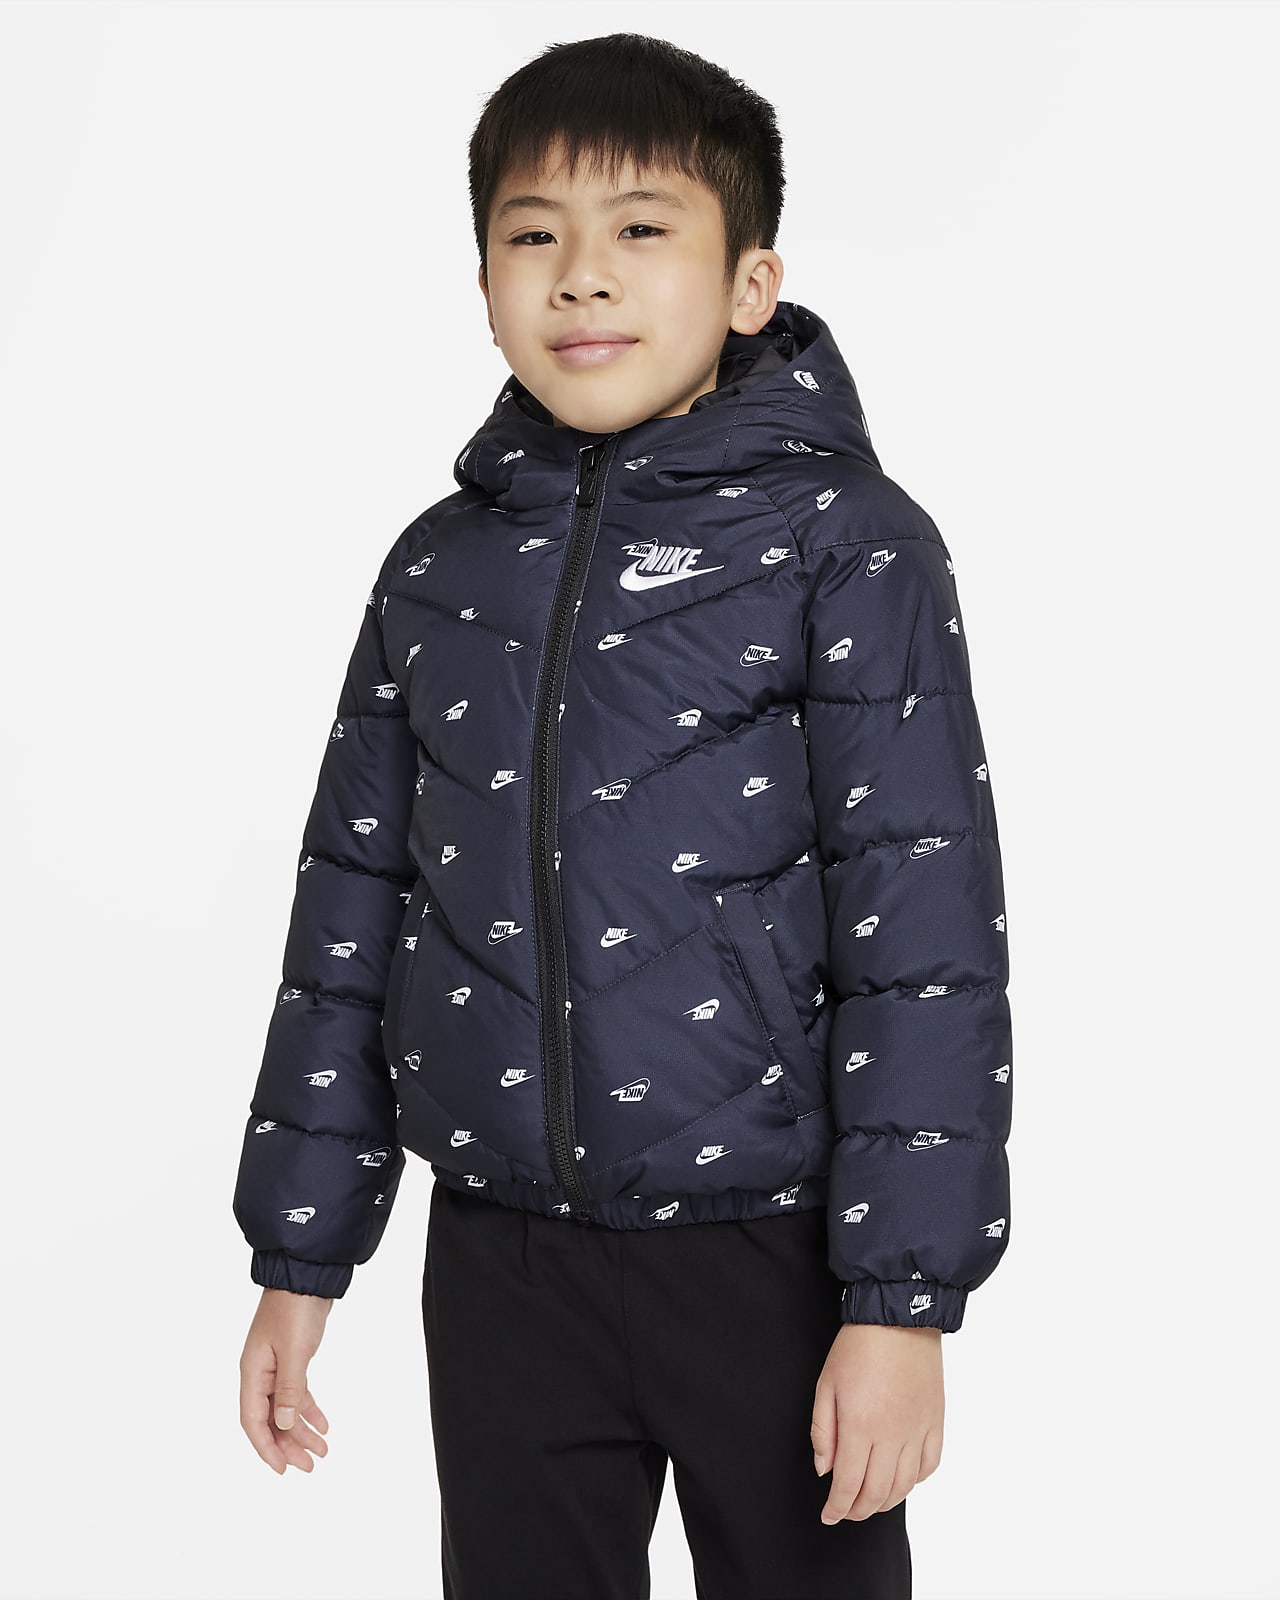 Nike Younger Kids' Printed Hooded Jacket